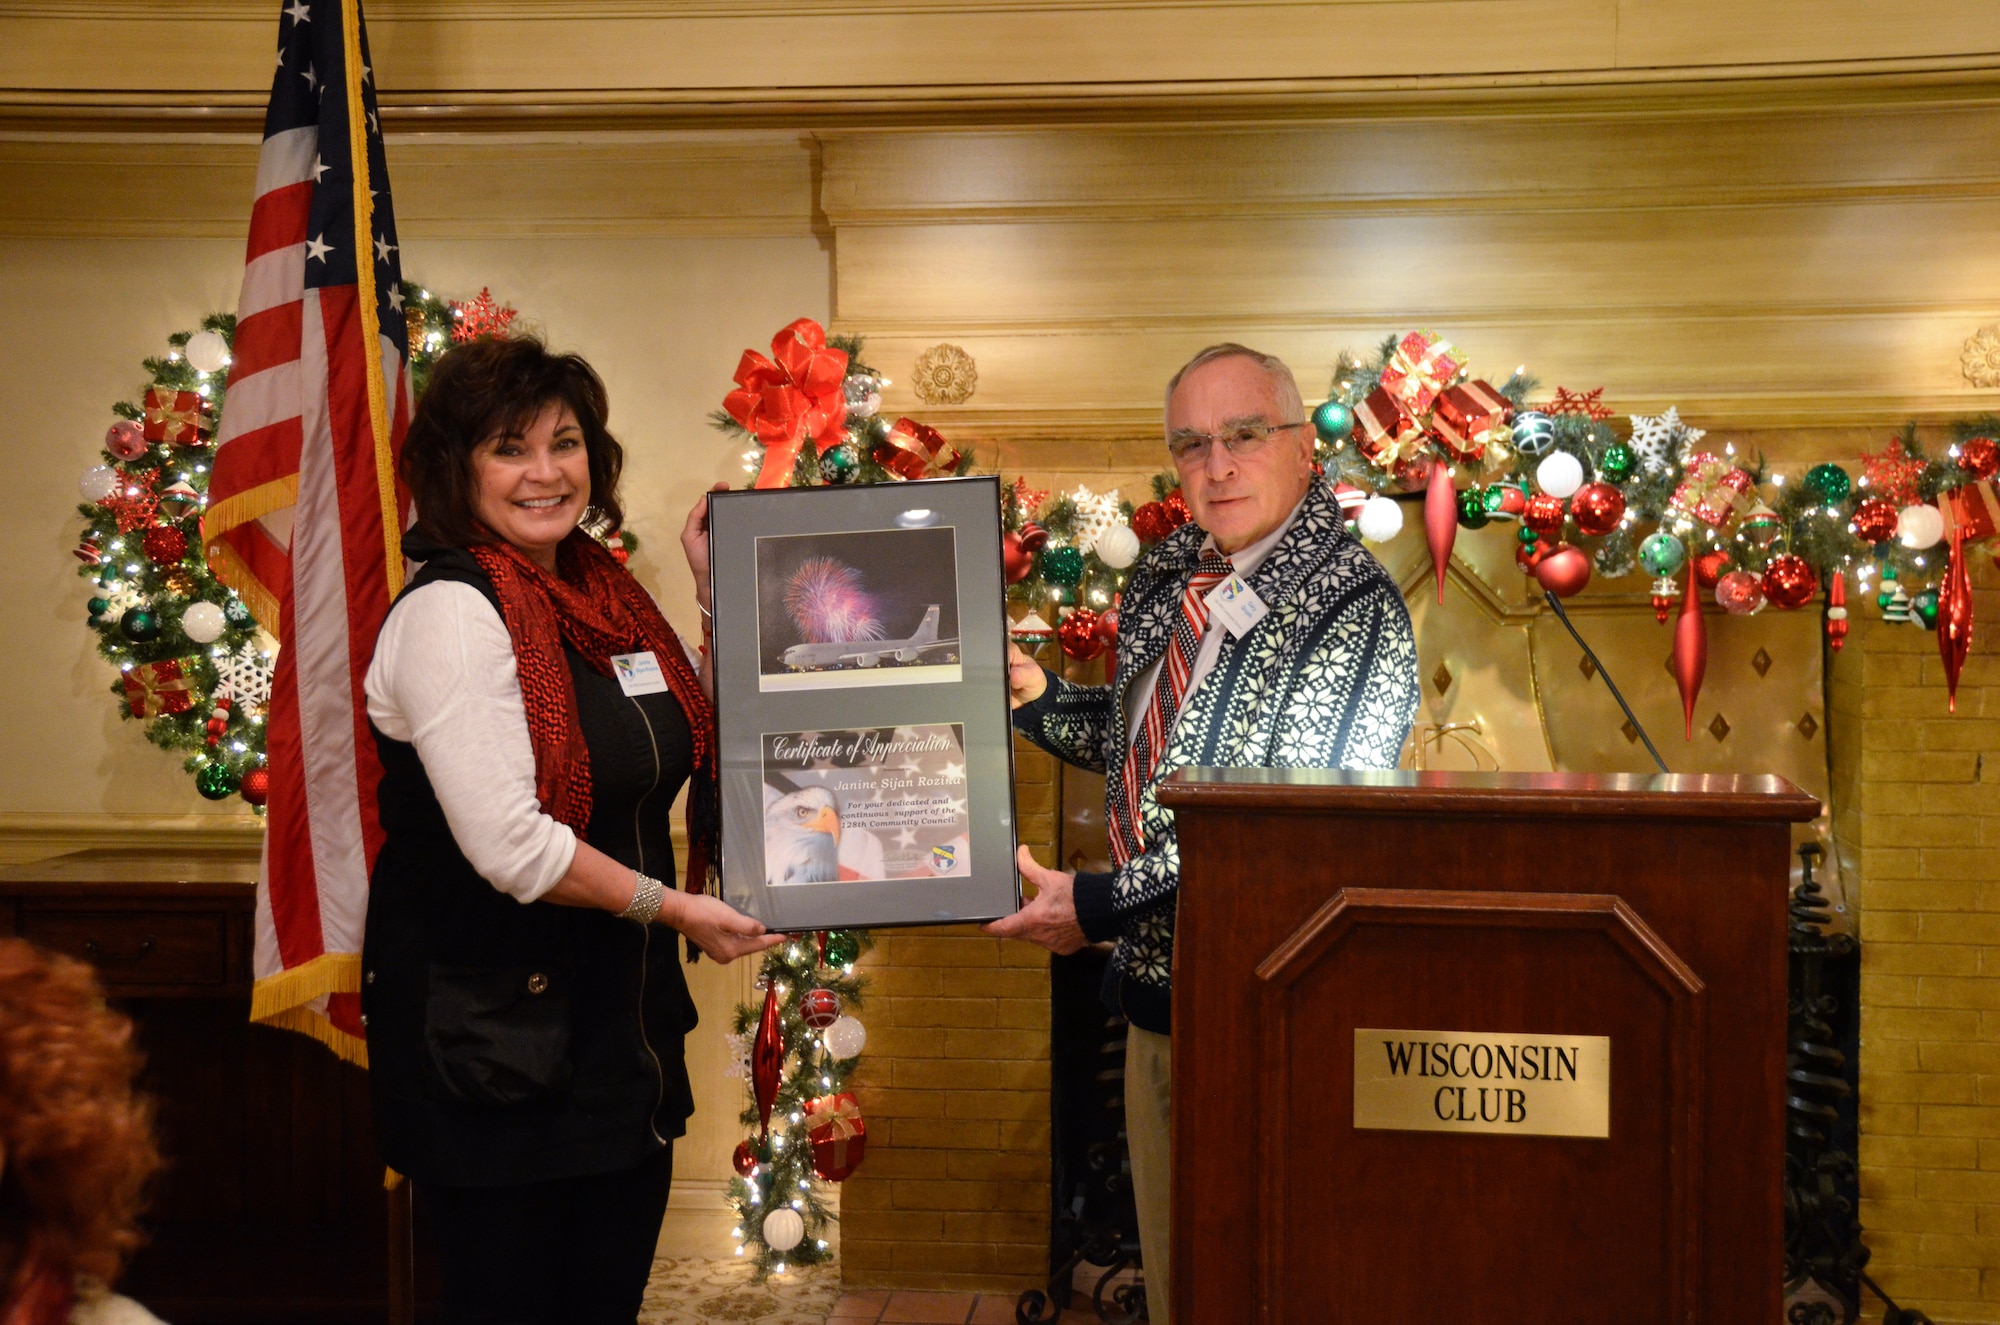 Janine Sijan Rozina receives a Certificate of Appreciation during a 128th Community Council general membership meeting held at the Wisconsin Club, Milwaukee, Dec. 12, 2014 from Gary Glojek, chairman of the 128th Community Council, for her dedication as a board member for the past two years. (U.S. Air National Guard photo by Maj. Sherri A. Hrovatin/Released)